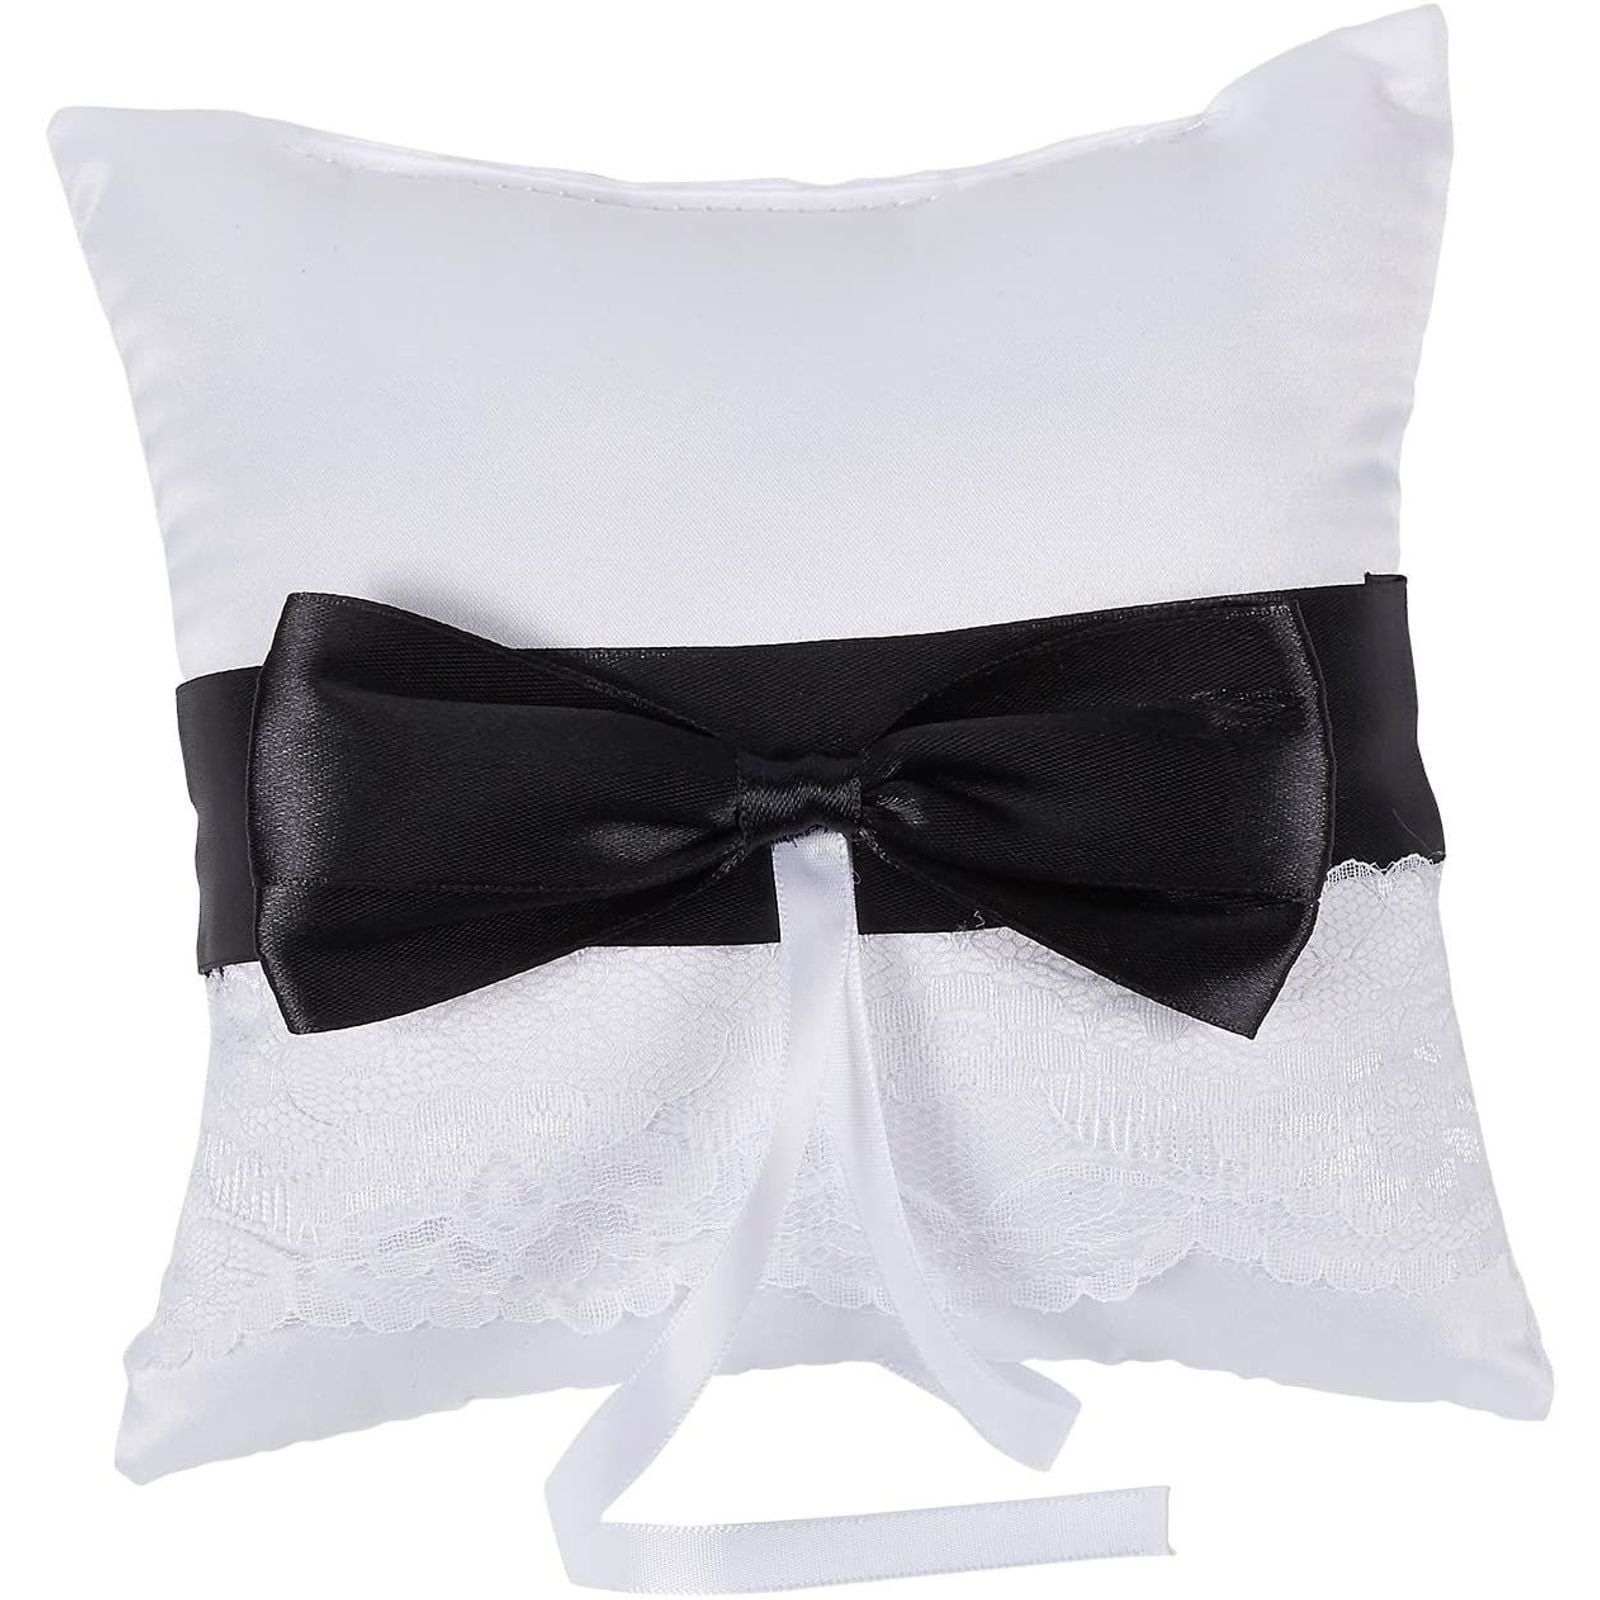 Home Room Satin Flower Bowknot Wedding Ring Bearer Cushion Pillow Lace Floral US 